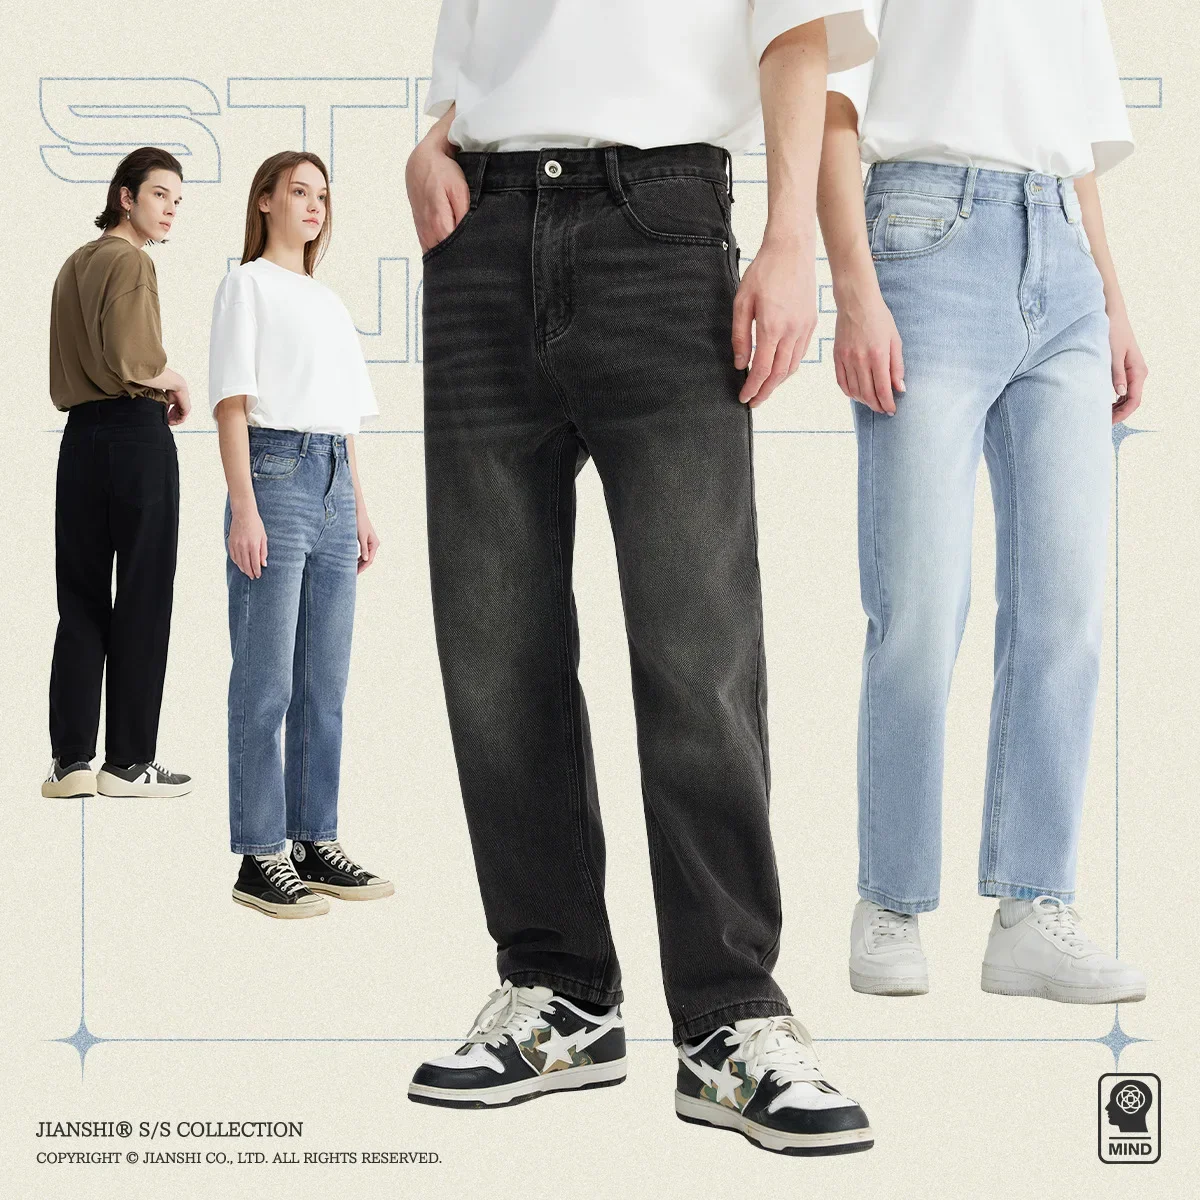 

BONXUY Hong Kong style retro classic versatile simple casual Slim nine jeans men washed old small straight casual pants